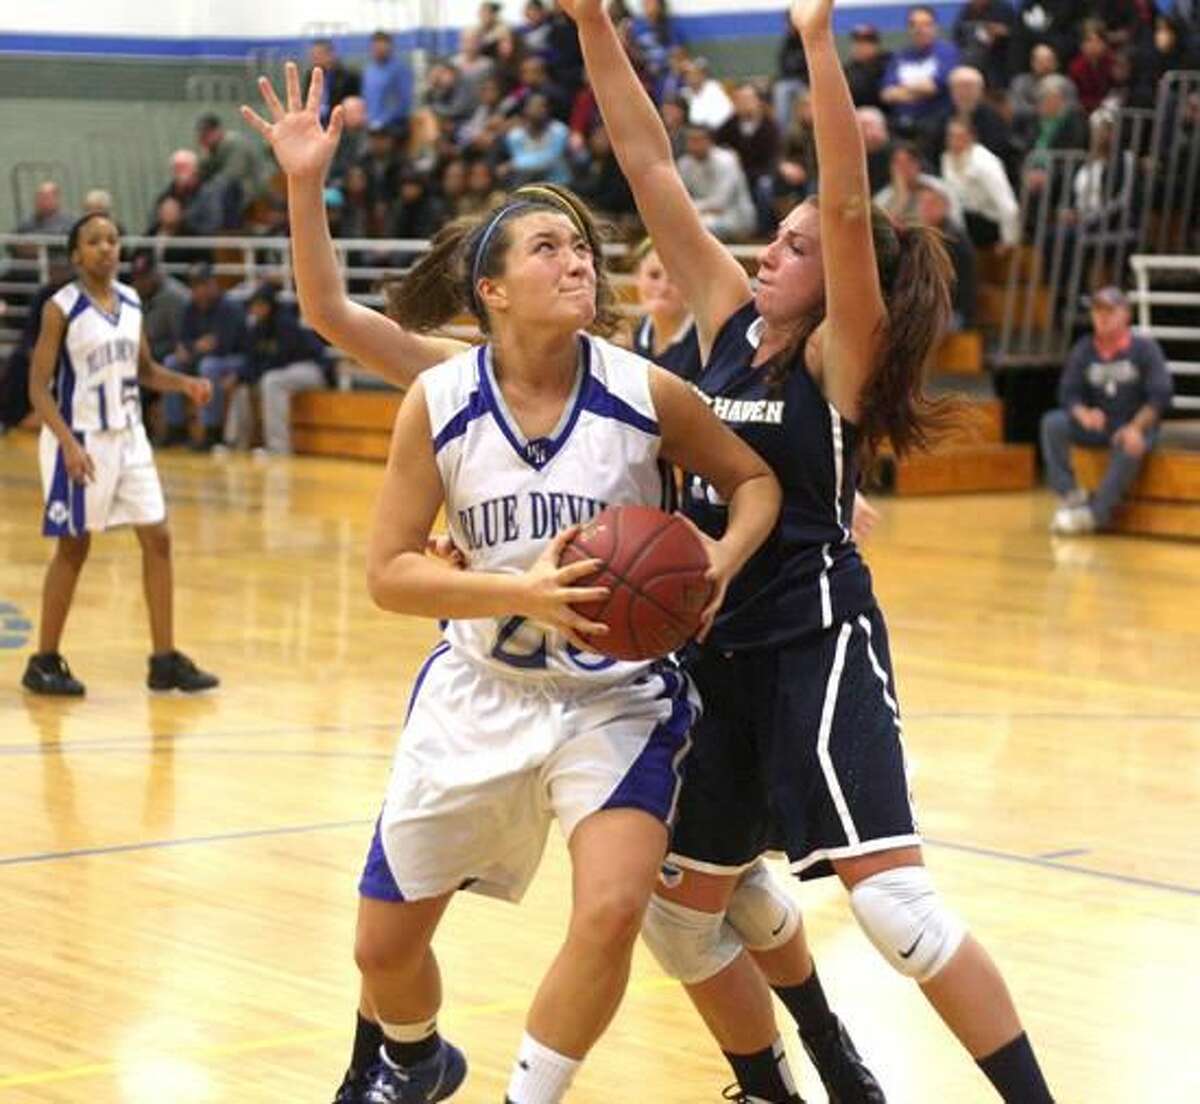 Photo by Russ McCreven West Haven's McKenzie Farquharson eyes the basket as she makes her way past two East Haven defenders.